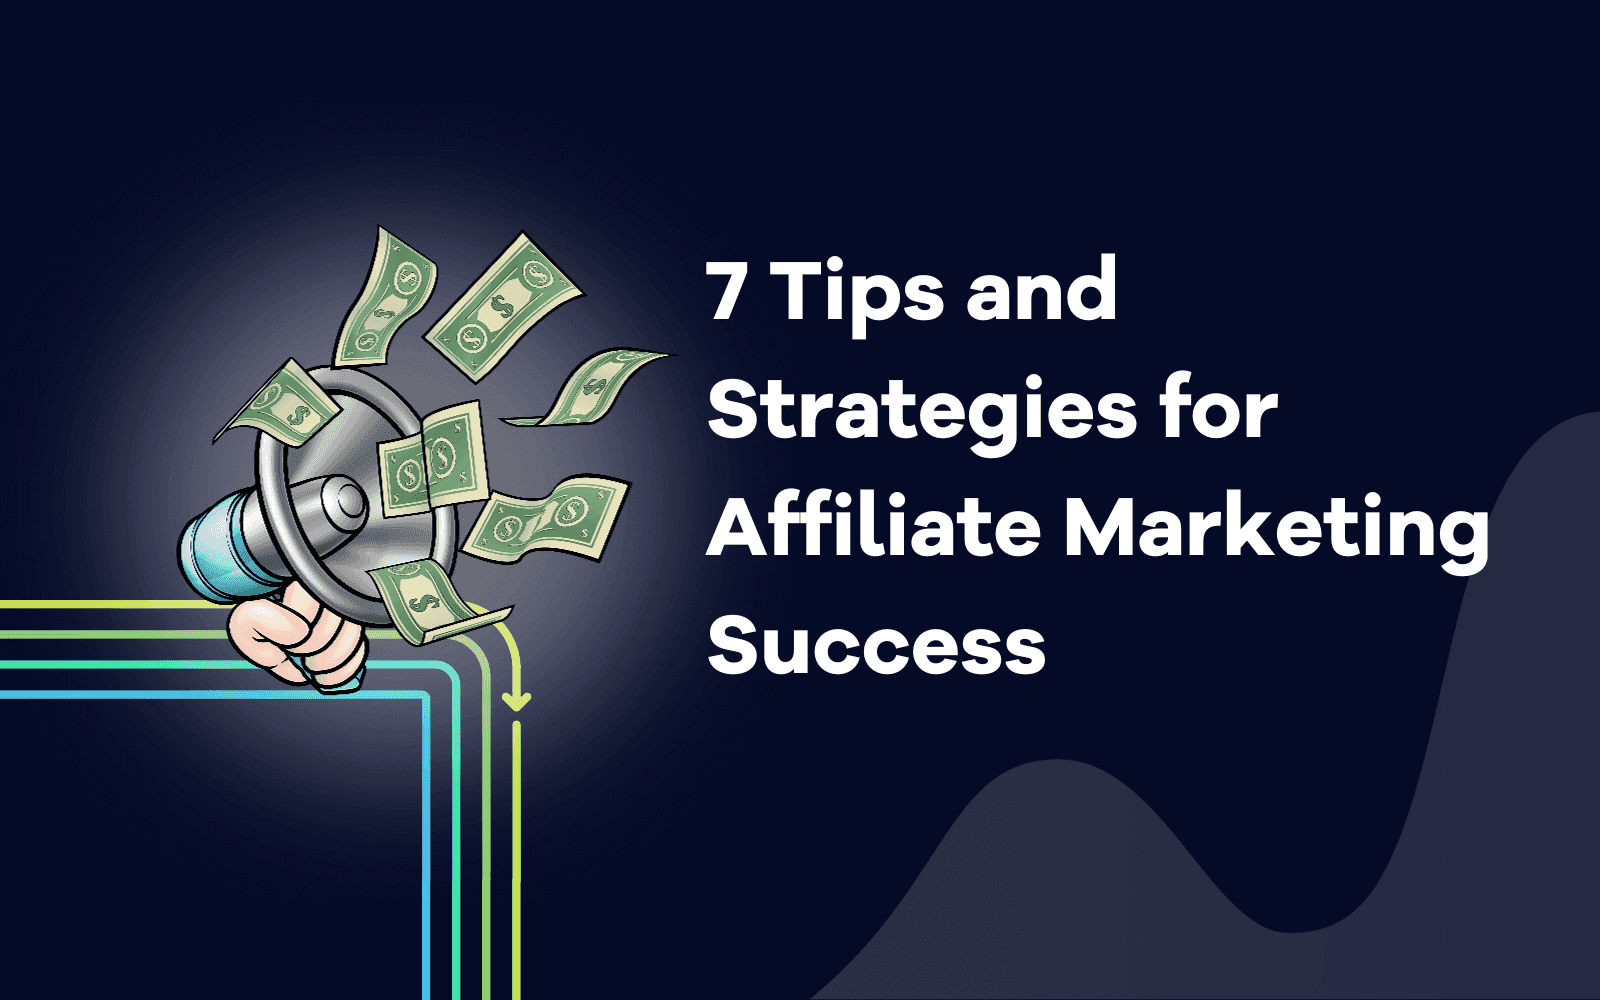 7 Tips and Strategies for Affiliate Marketing Success